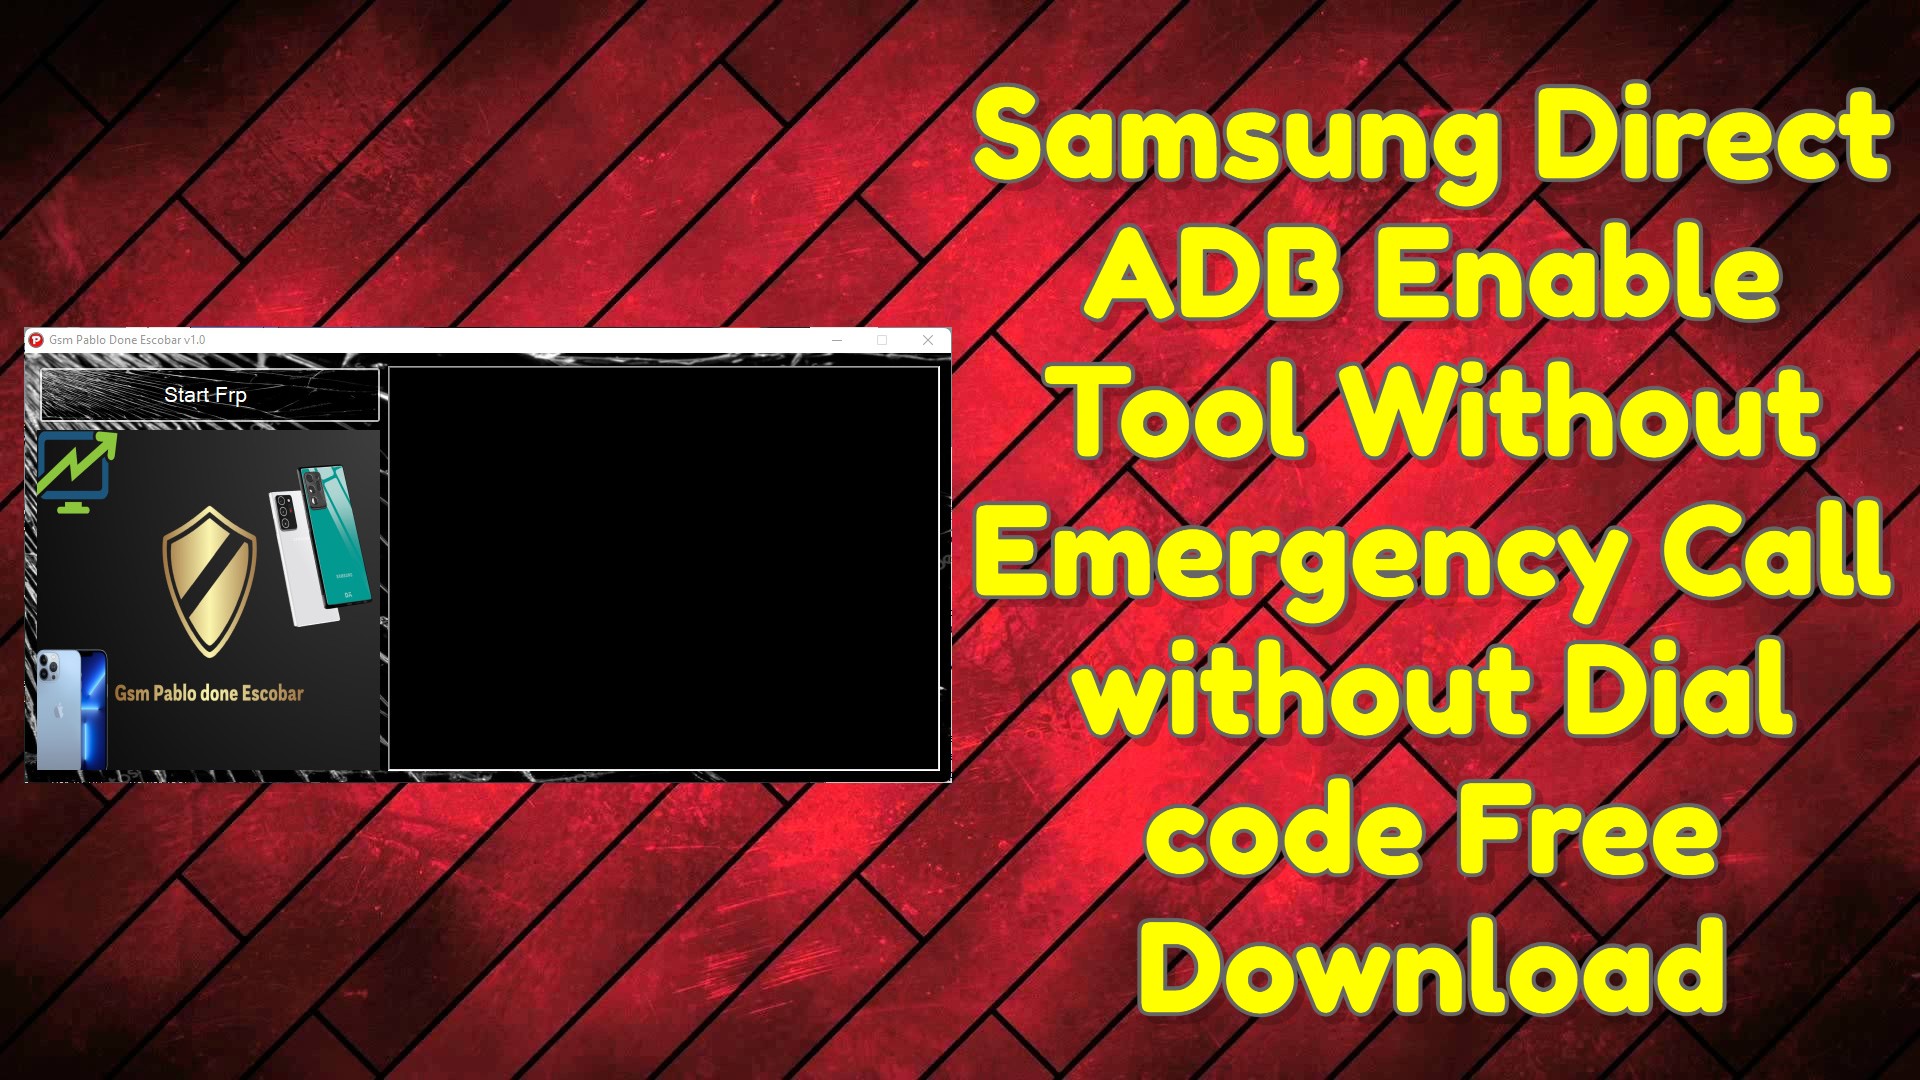 Samsung Direct ADB Enable Tool Without Emergency Call Free Download